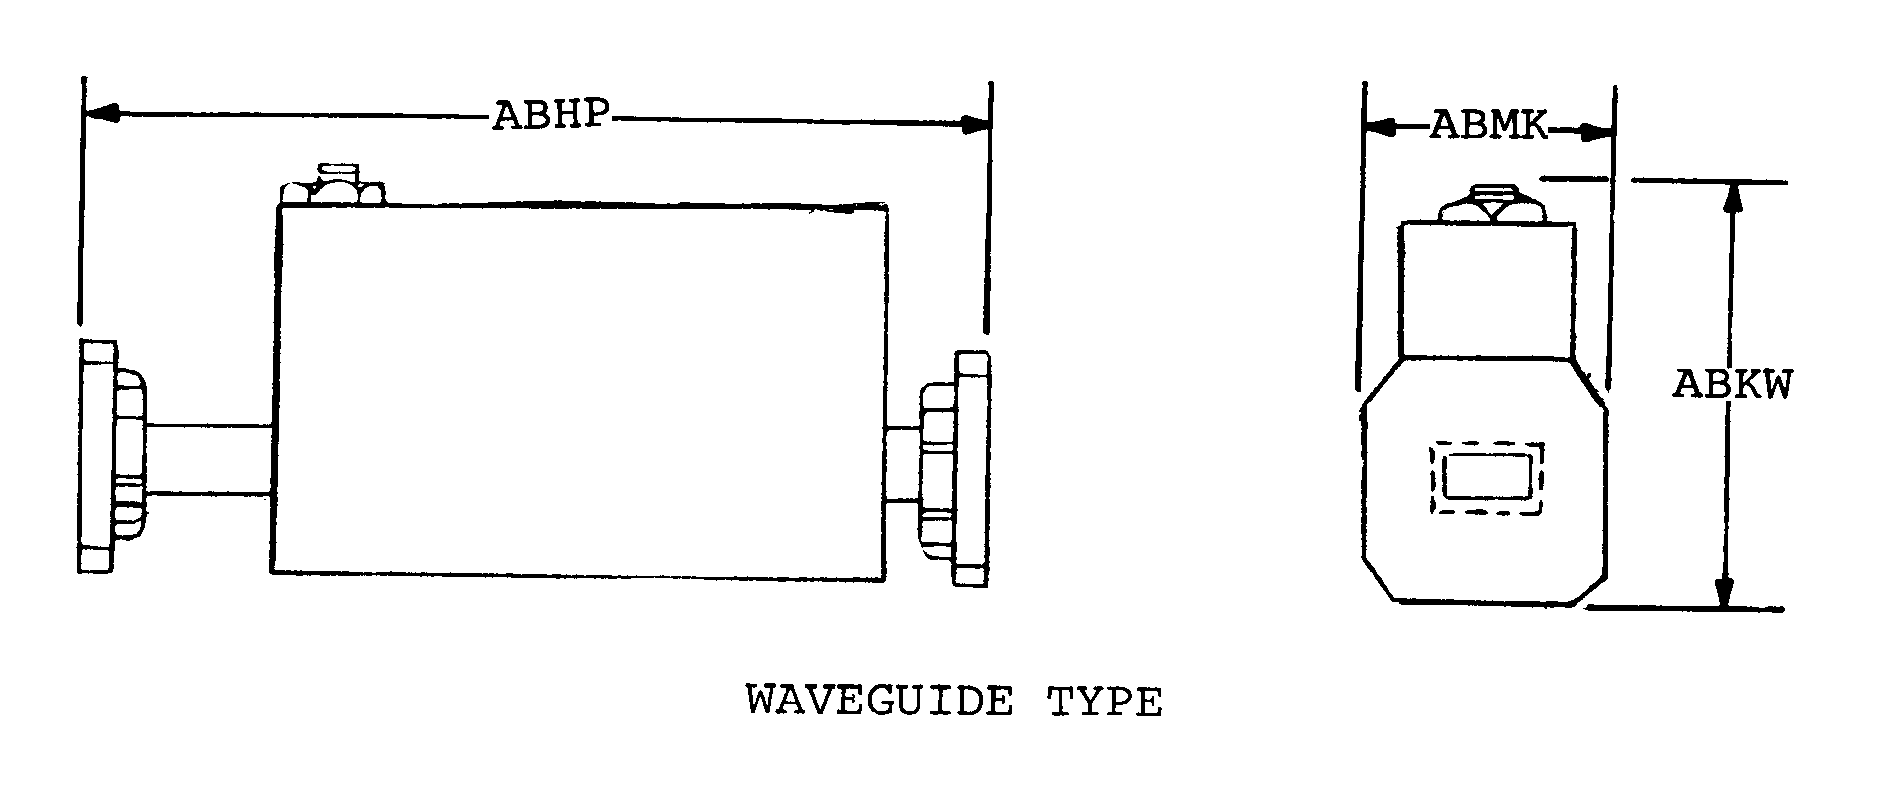 WAVEGUIDE TYPE style nsn 5985-01-419-5012